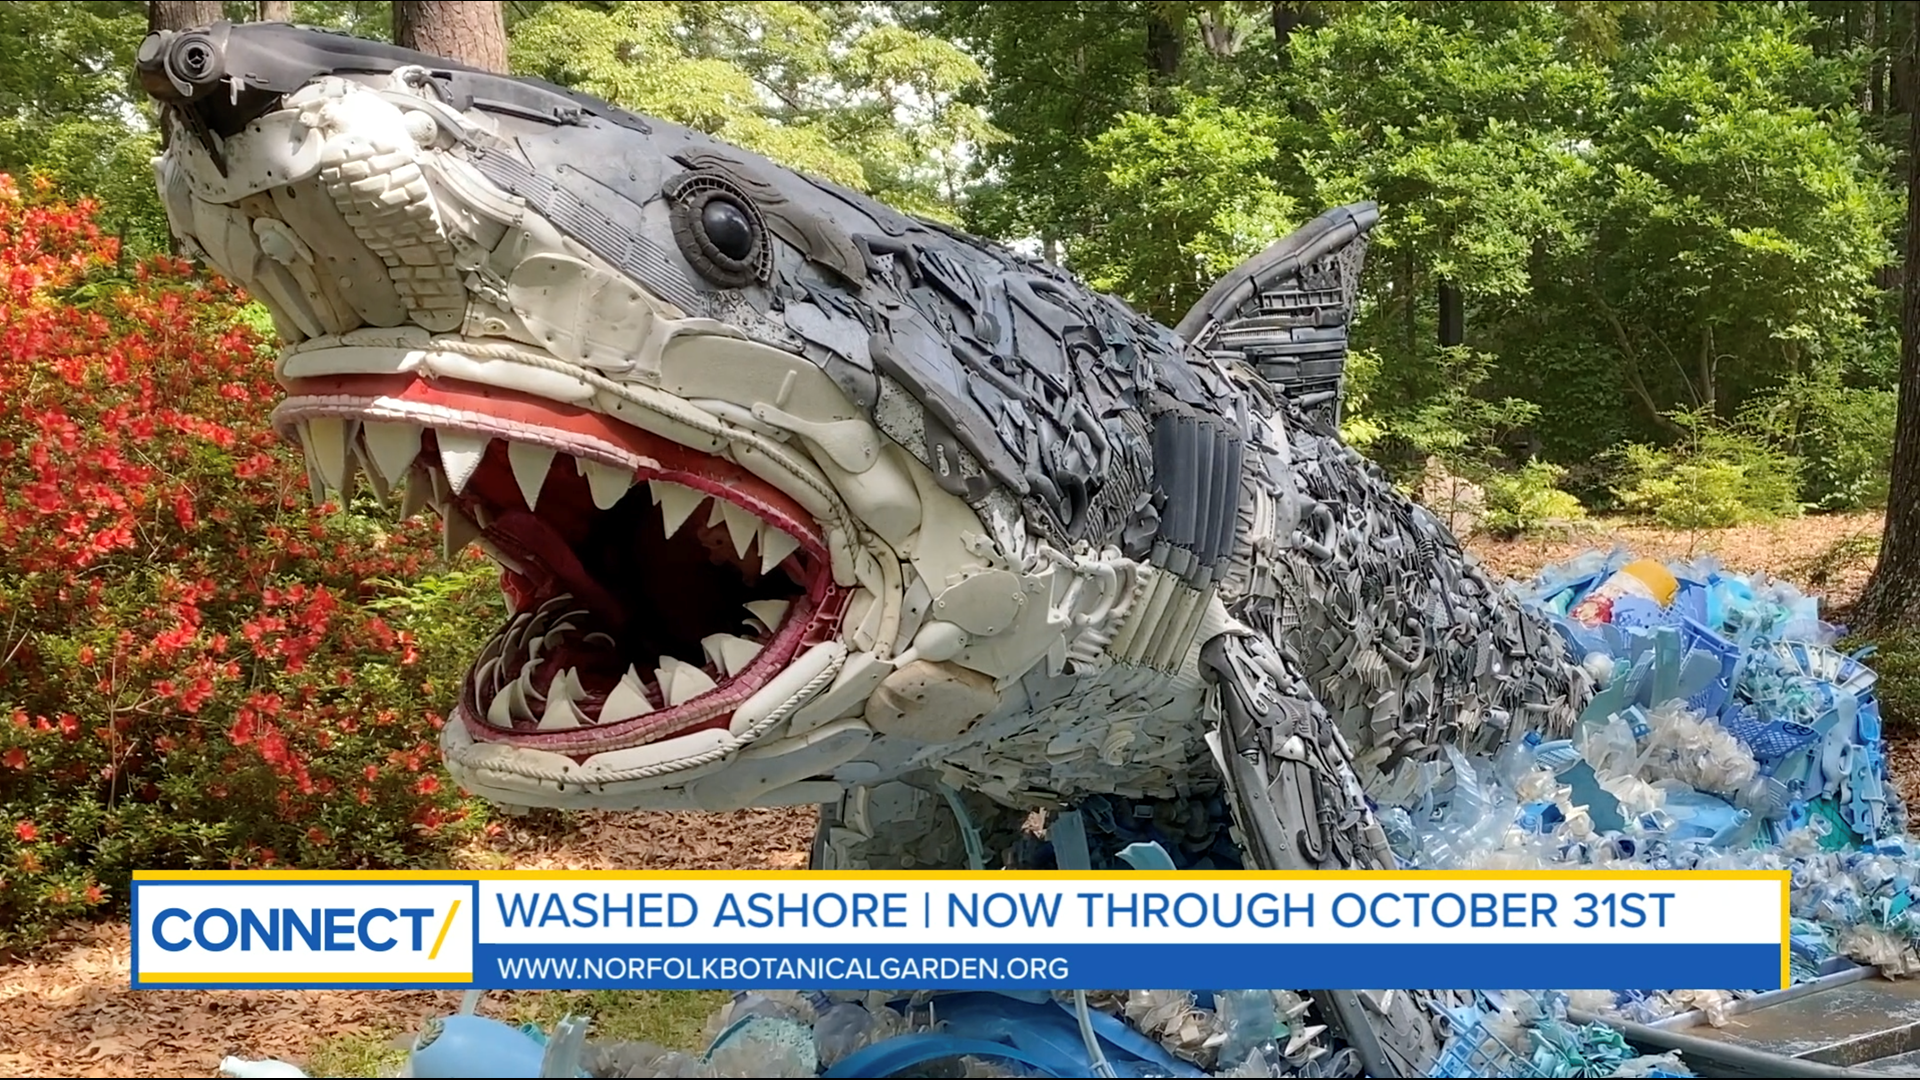 "Washed Ashore: Art to Save the Sea" showcases sculptures made of debris and garbage found in waterways. The exhibit is open now through October 31.